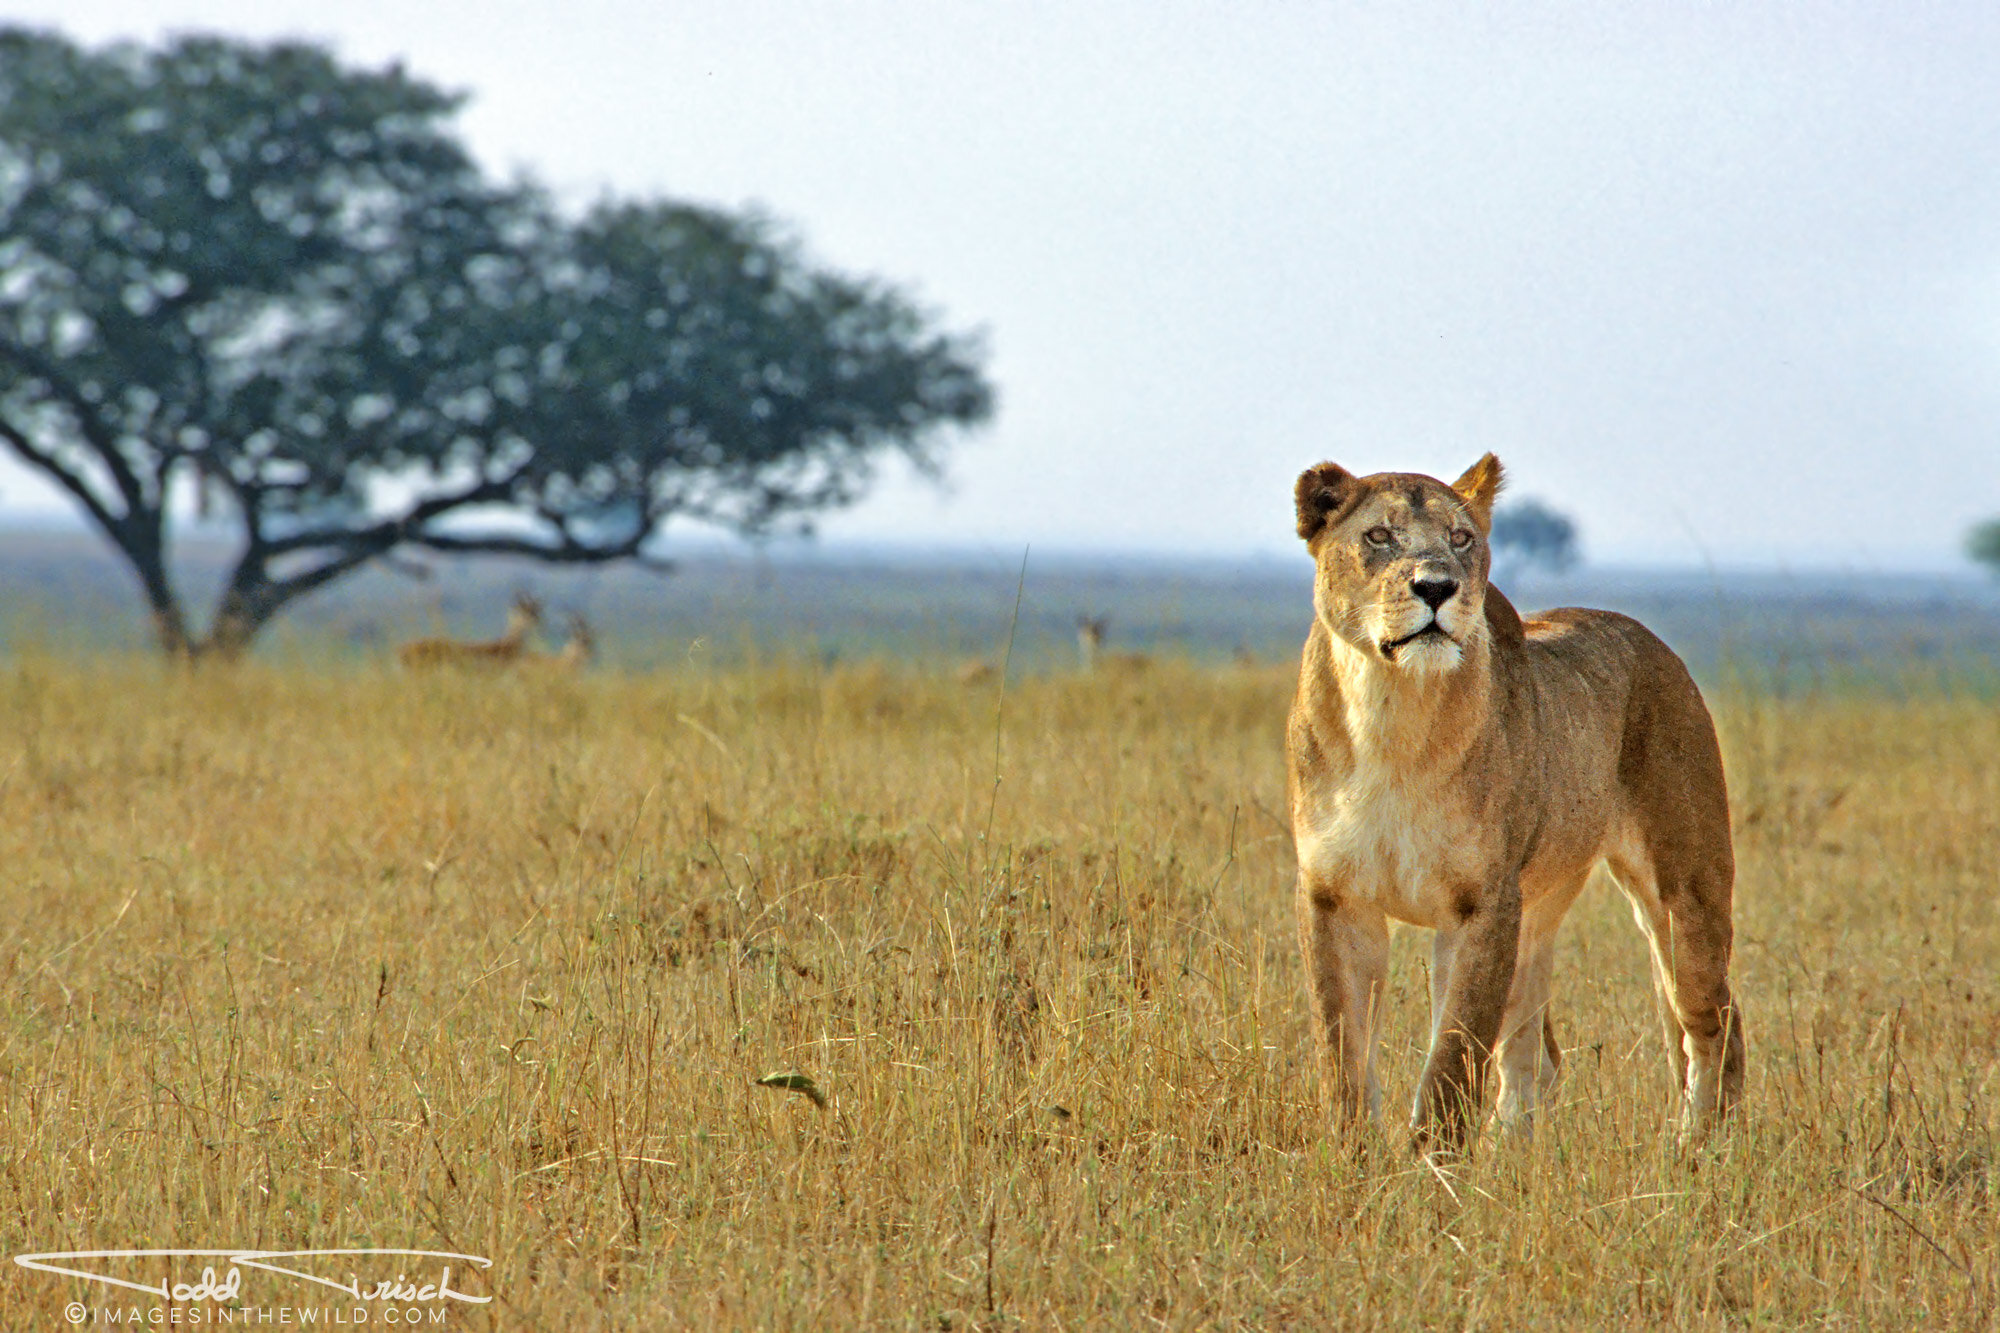 Lioness in search of prey